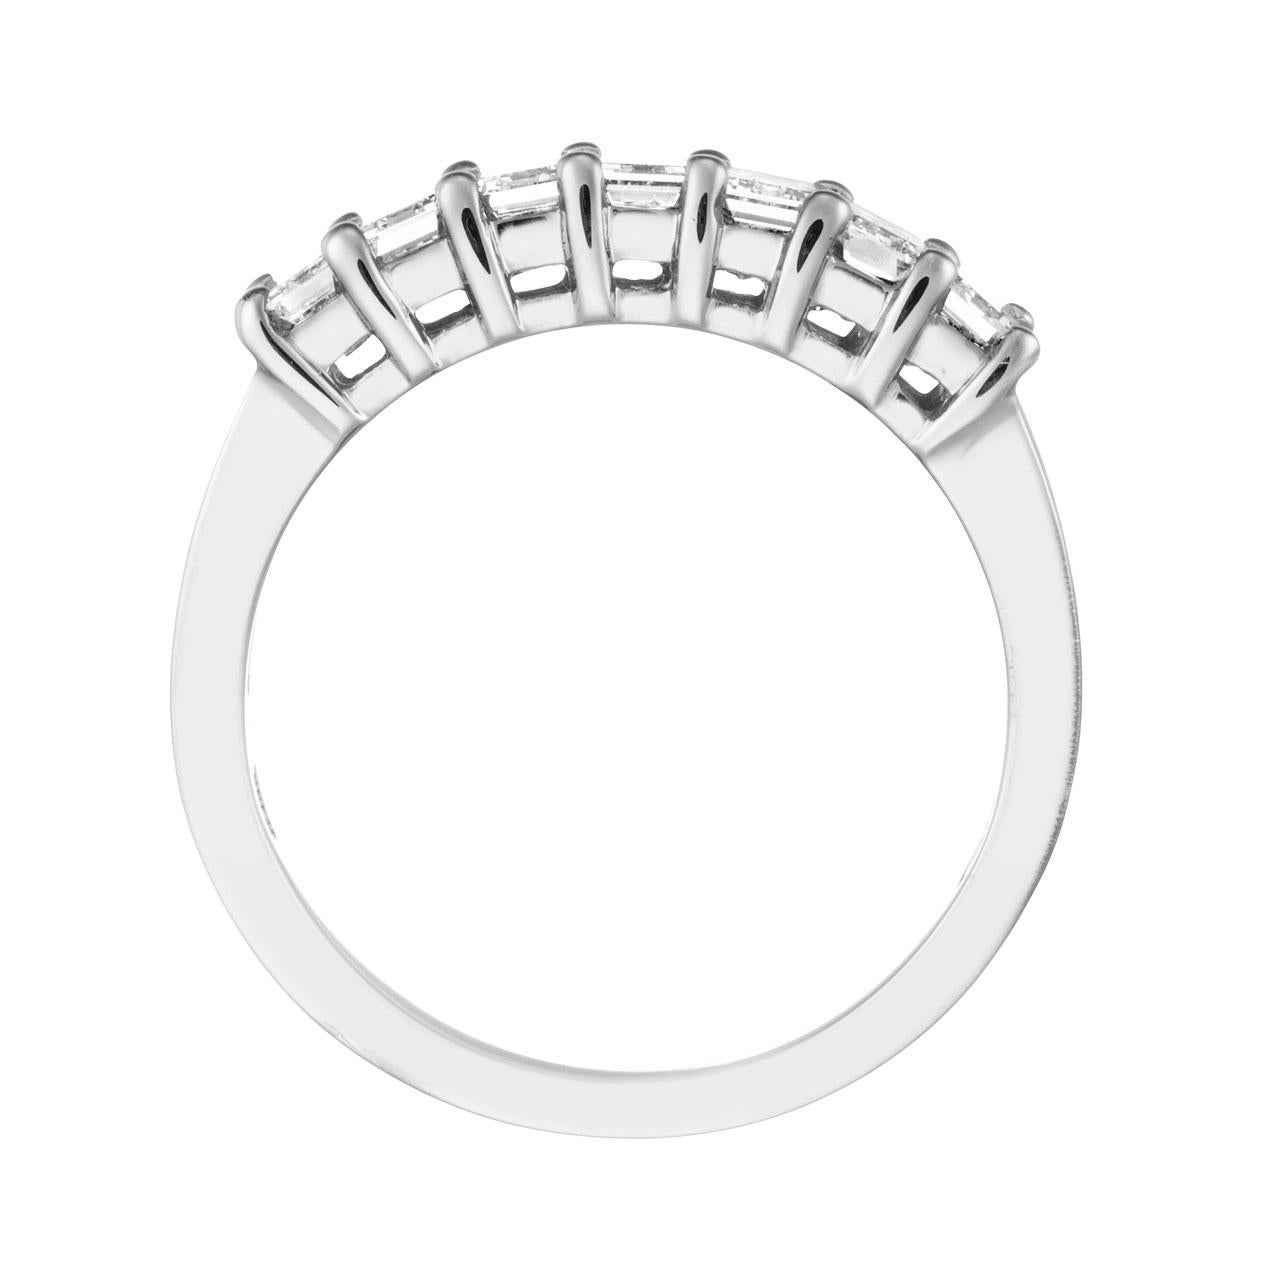 This beautiful Emerald Cut diamond band features 7 stones weighing 1.23 ct.  total weight of G color VS1 clarity diamonds. The ring is 18kt white gold and a finger size 5.75 but can easily be adjusted. If you don't see something, say something! We